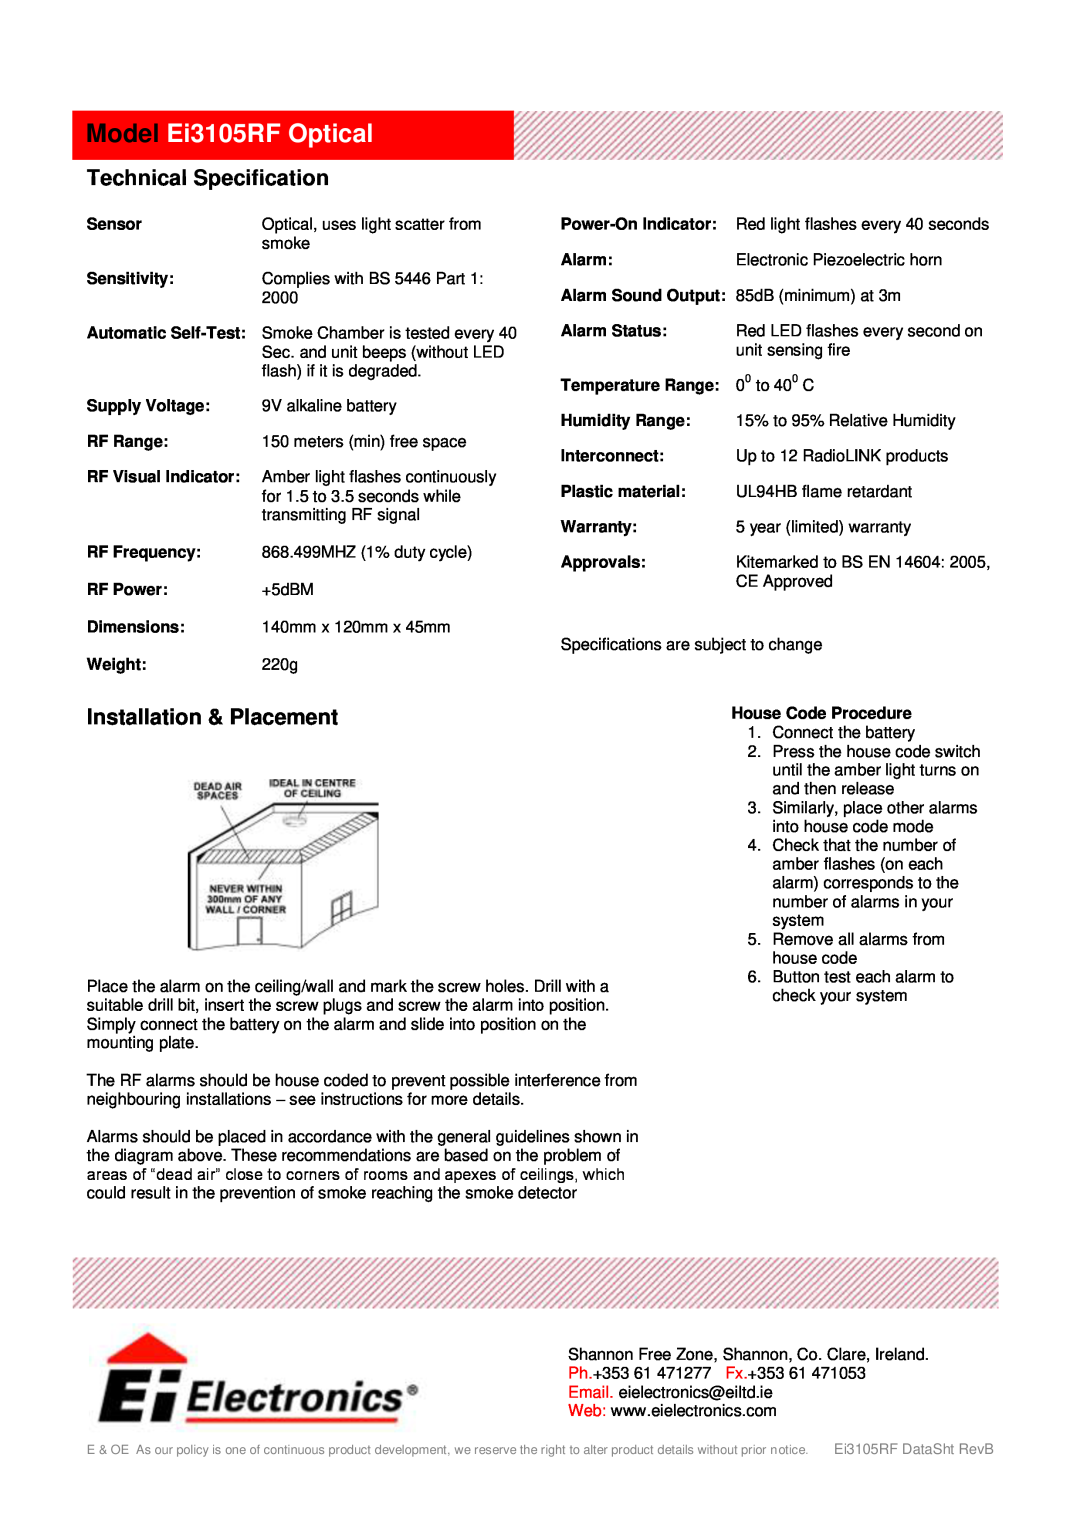 Ei Electronics manual Technical Specification, Installation & Placement, Model Ei3105RF Optical 